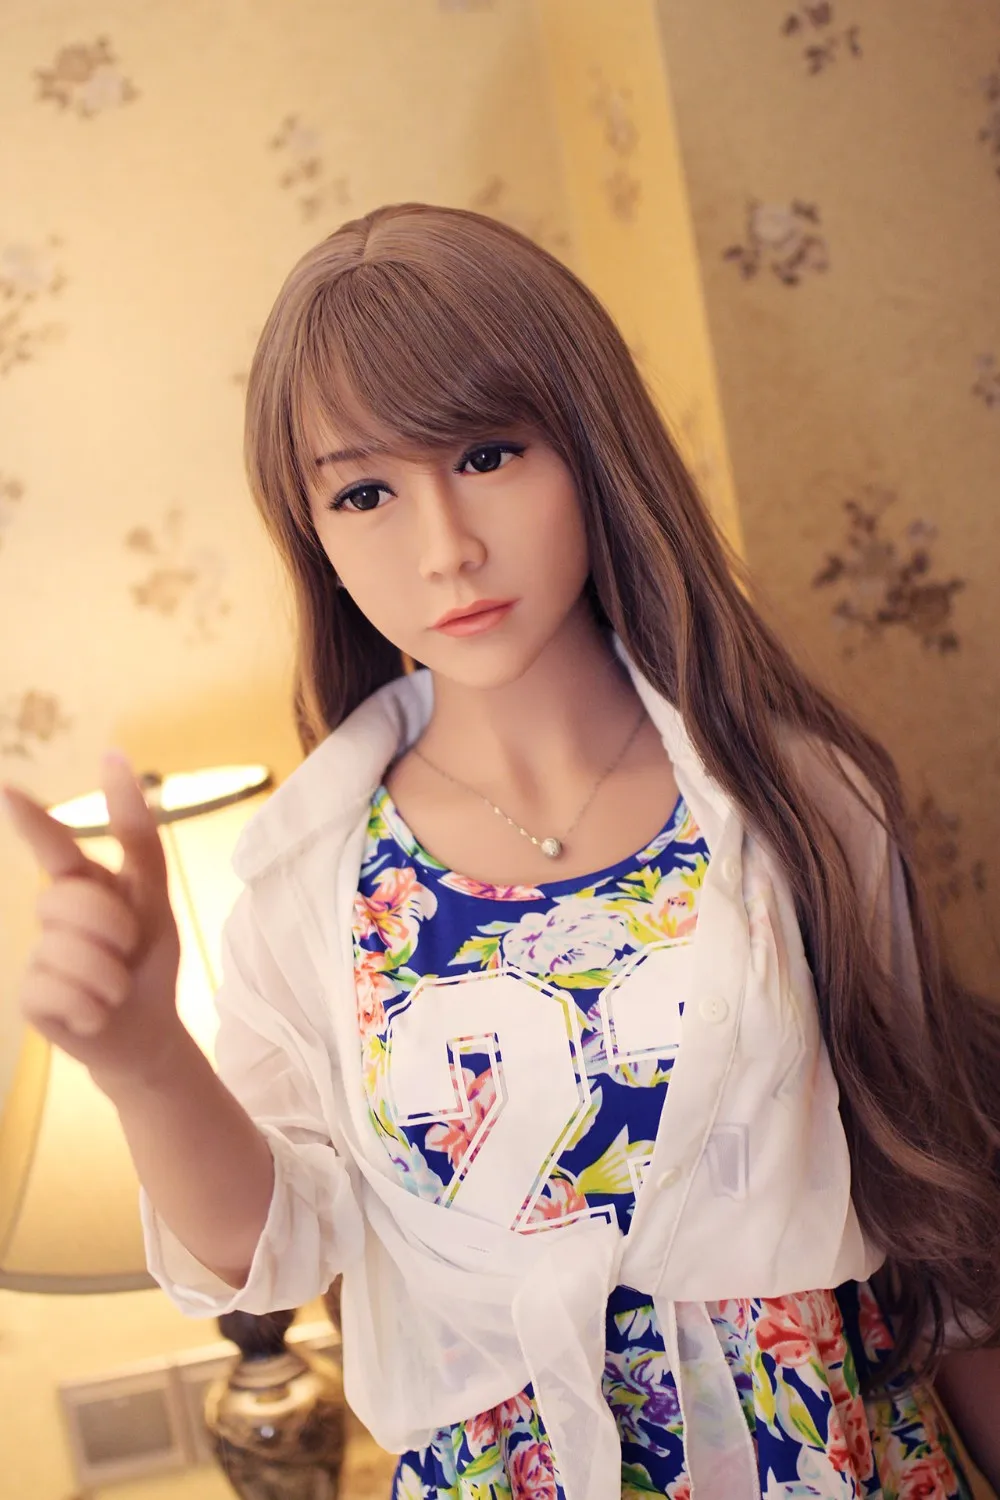 Japanese Price Adult Silicone Sex Doll Real Lifelike Sex Toy For Men Free Download Nude Photo